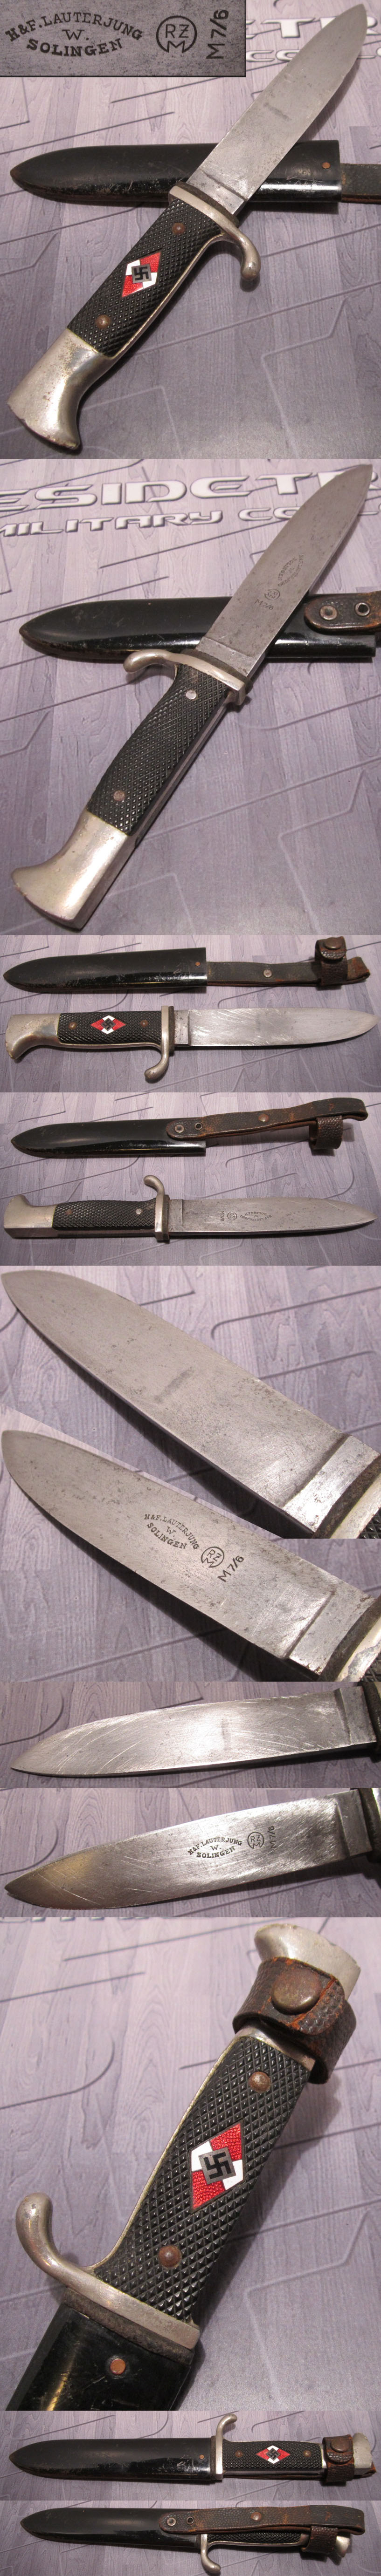 Transitional Hitler Youth Knife by H. & F. Lauterjung